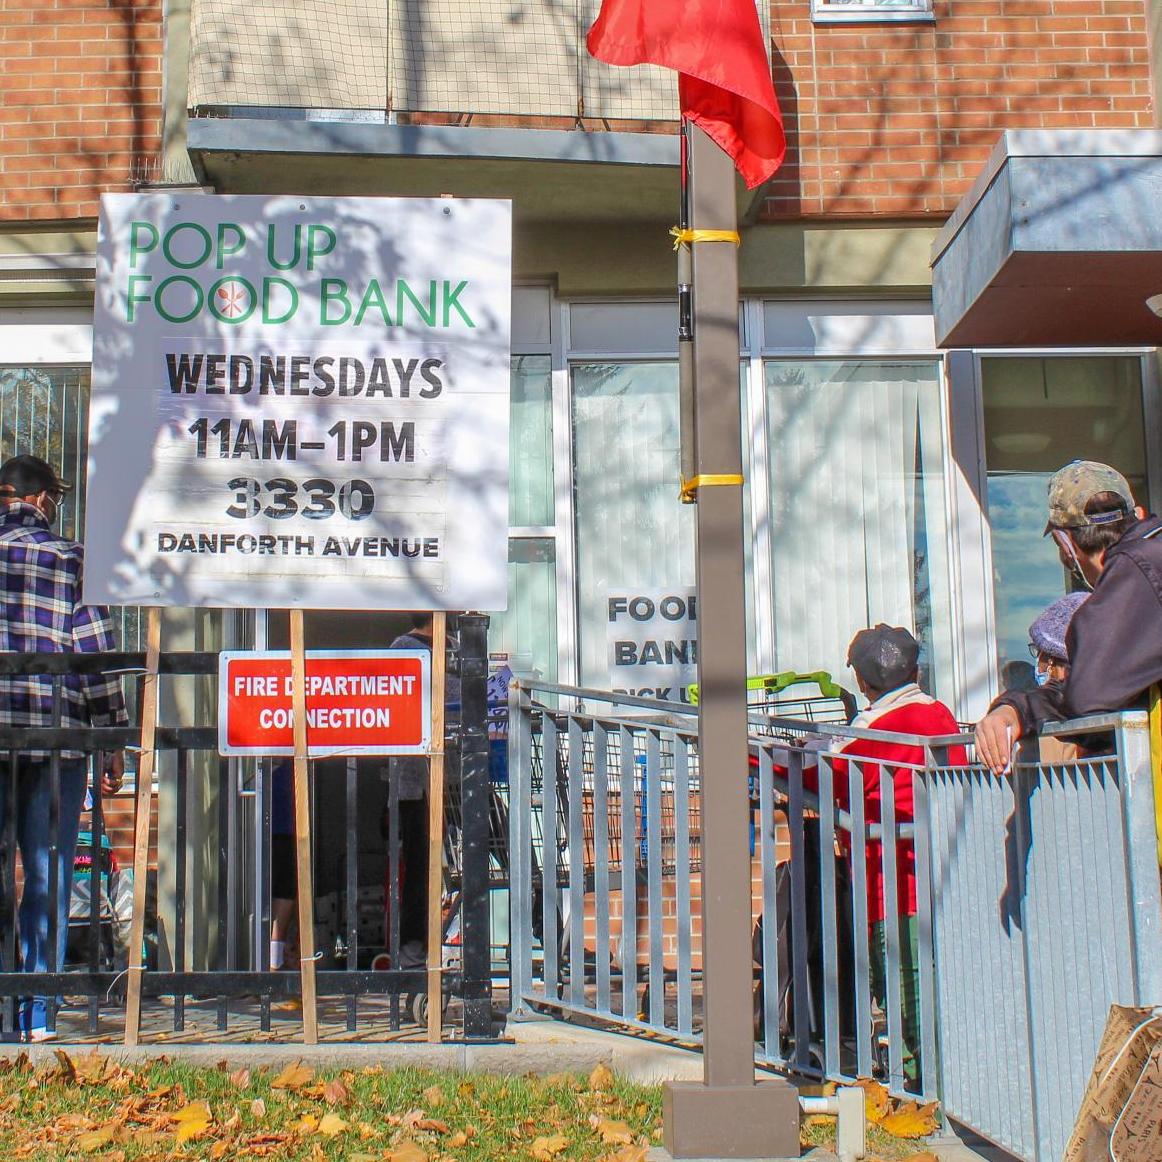 A food bank pop up in Toronto during the COVID-19 pandemic